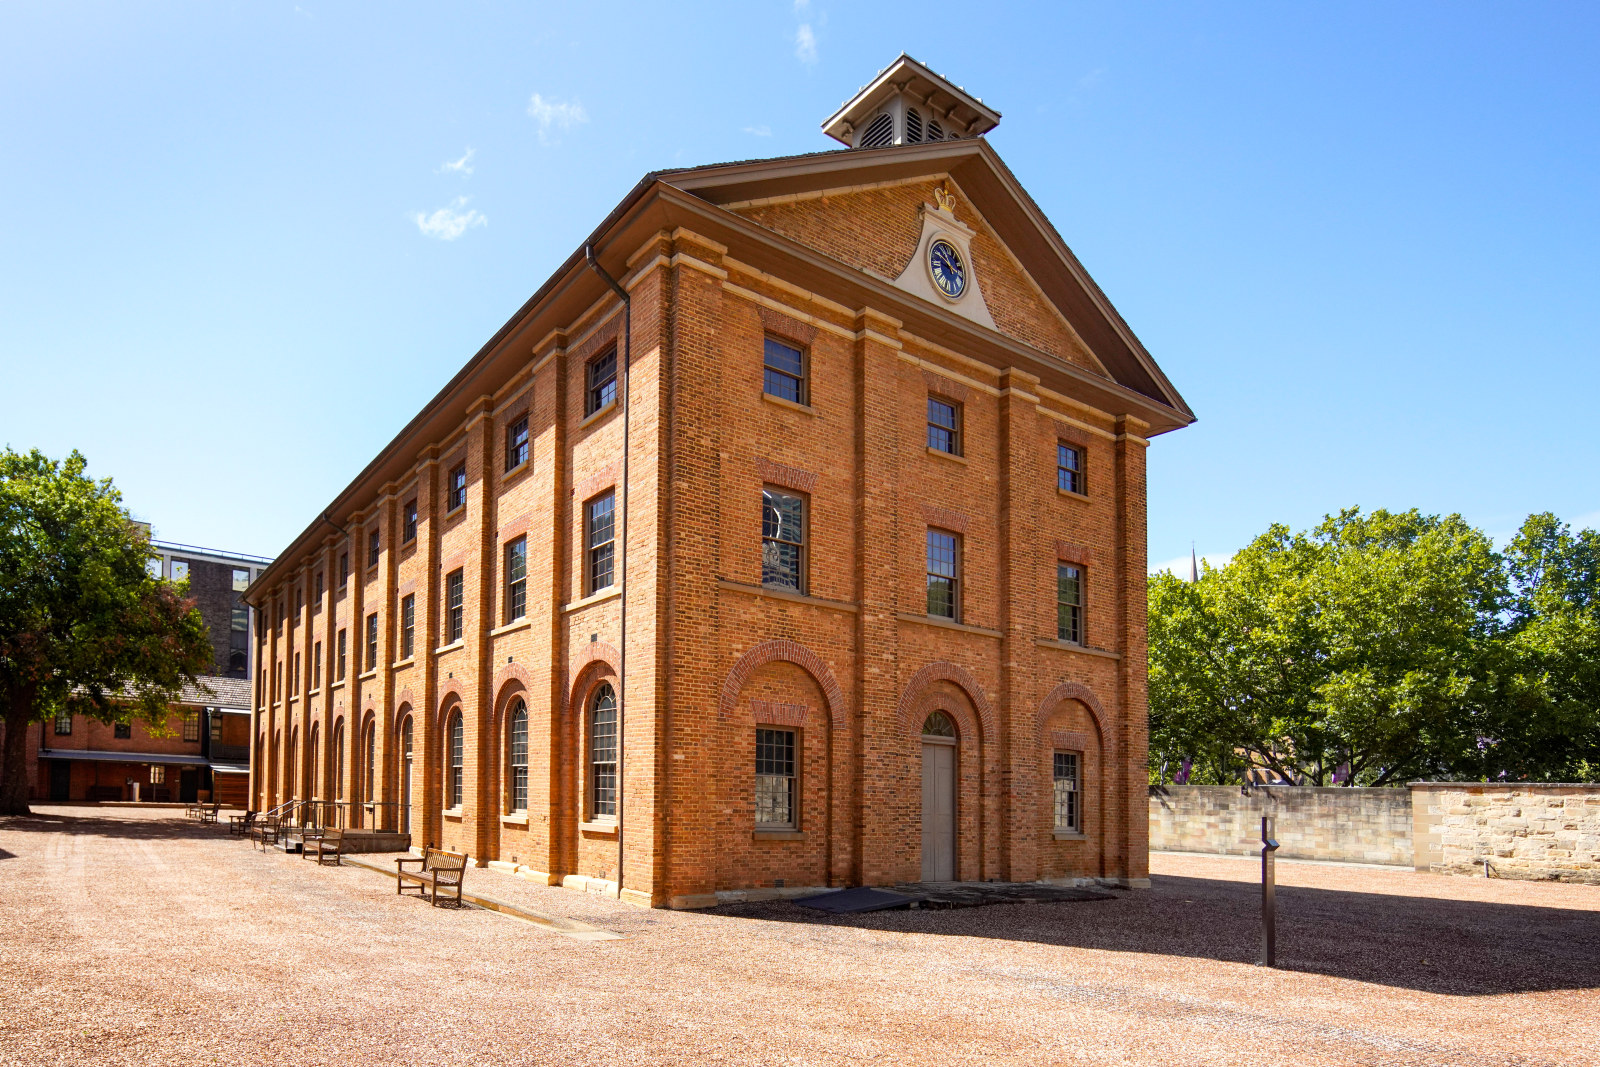 External view, [East, West, North, South] elevation of Hyde Park Barracks 